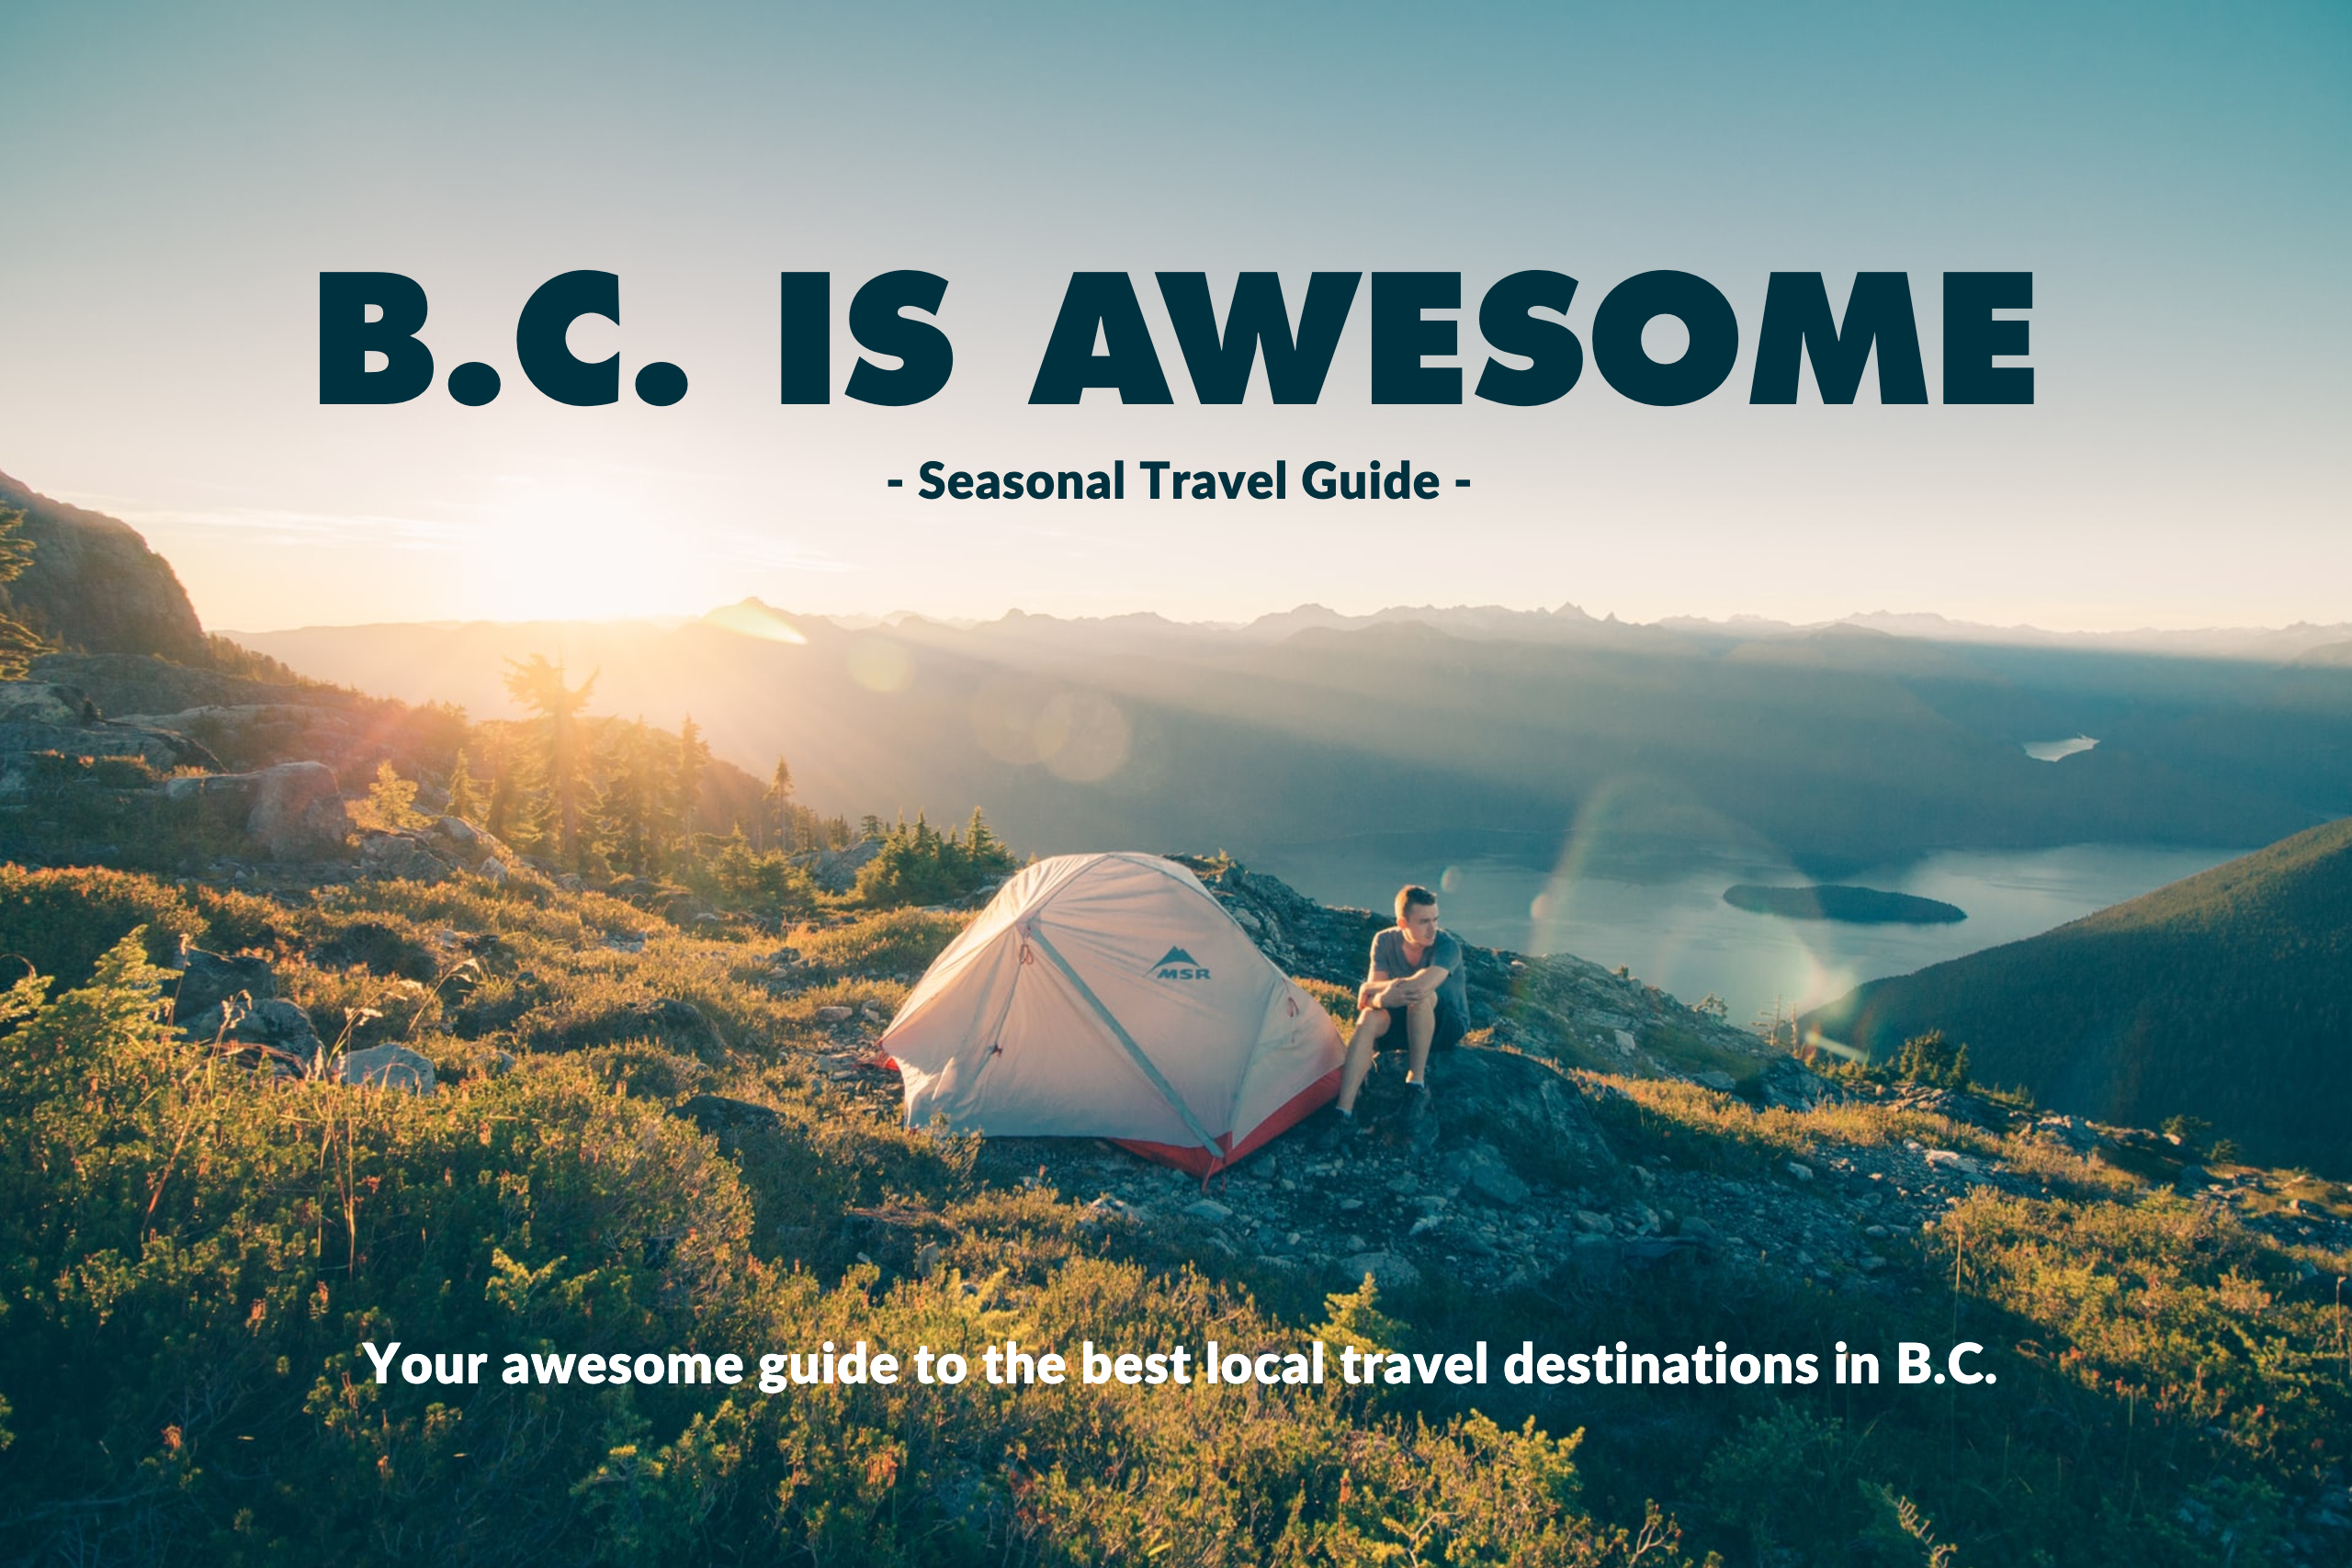 B.C. IS AWESOME SPRING SUMMER 2020